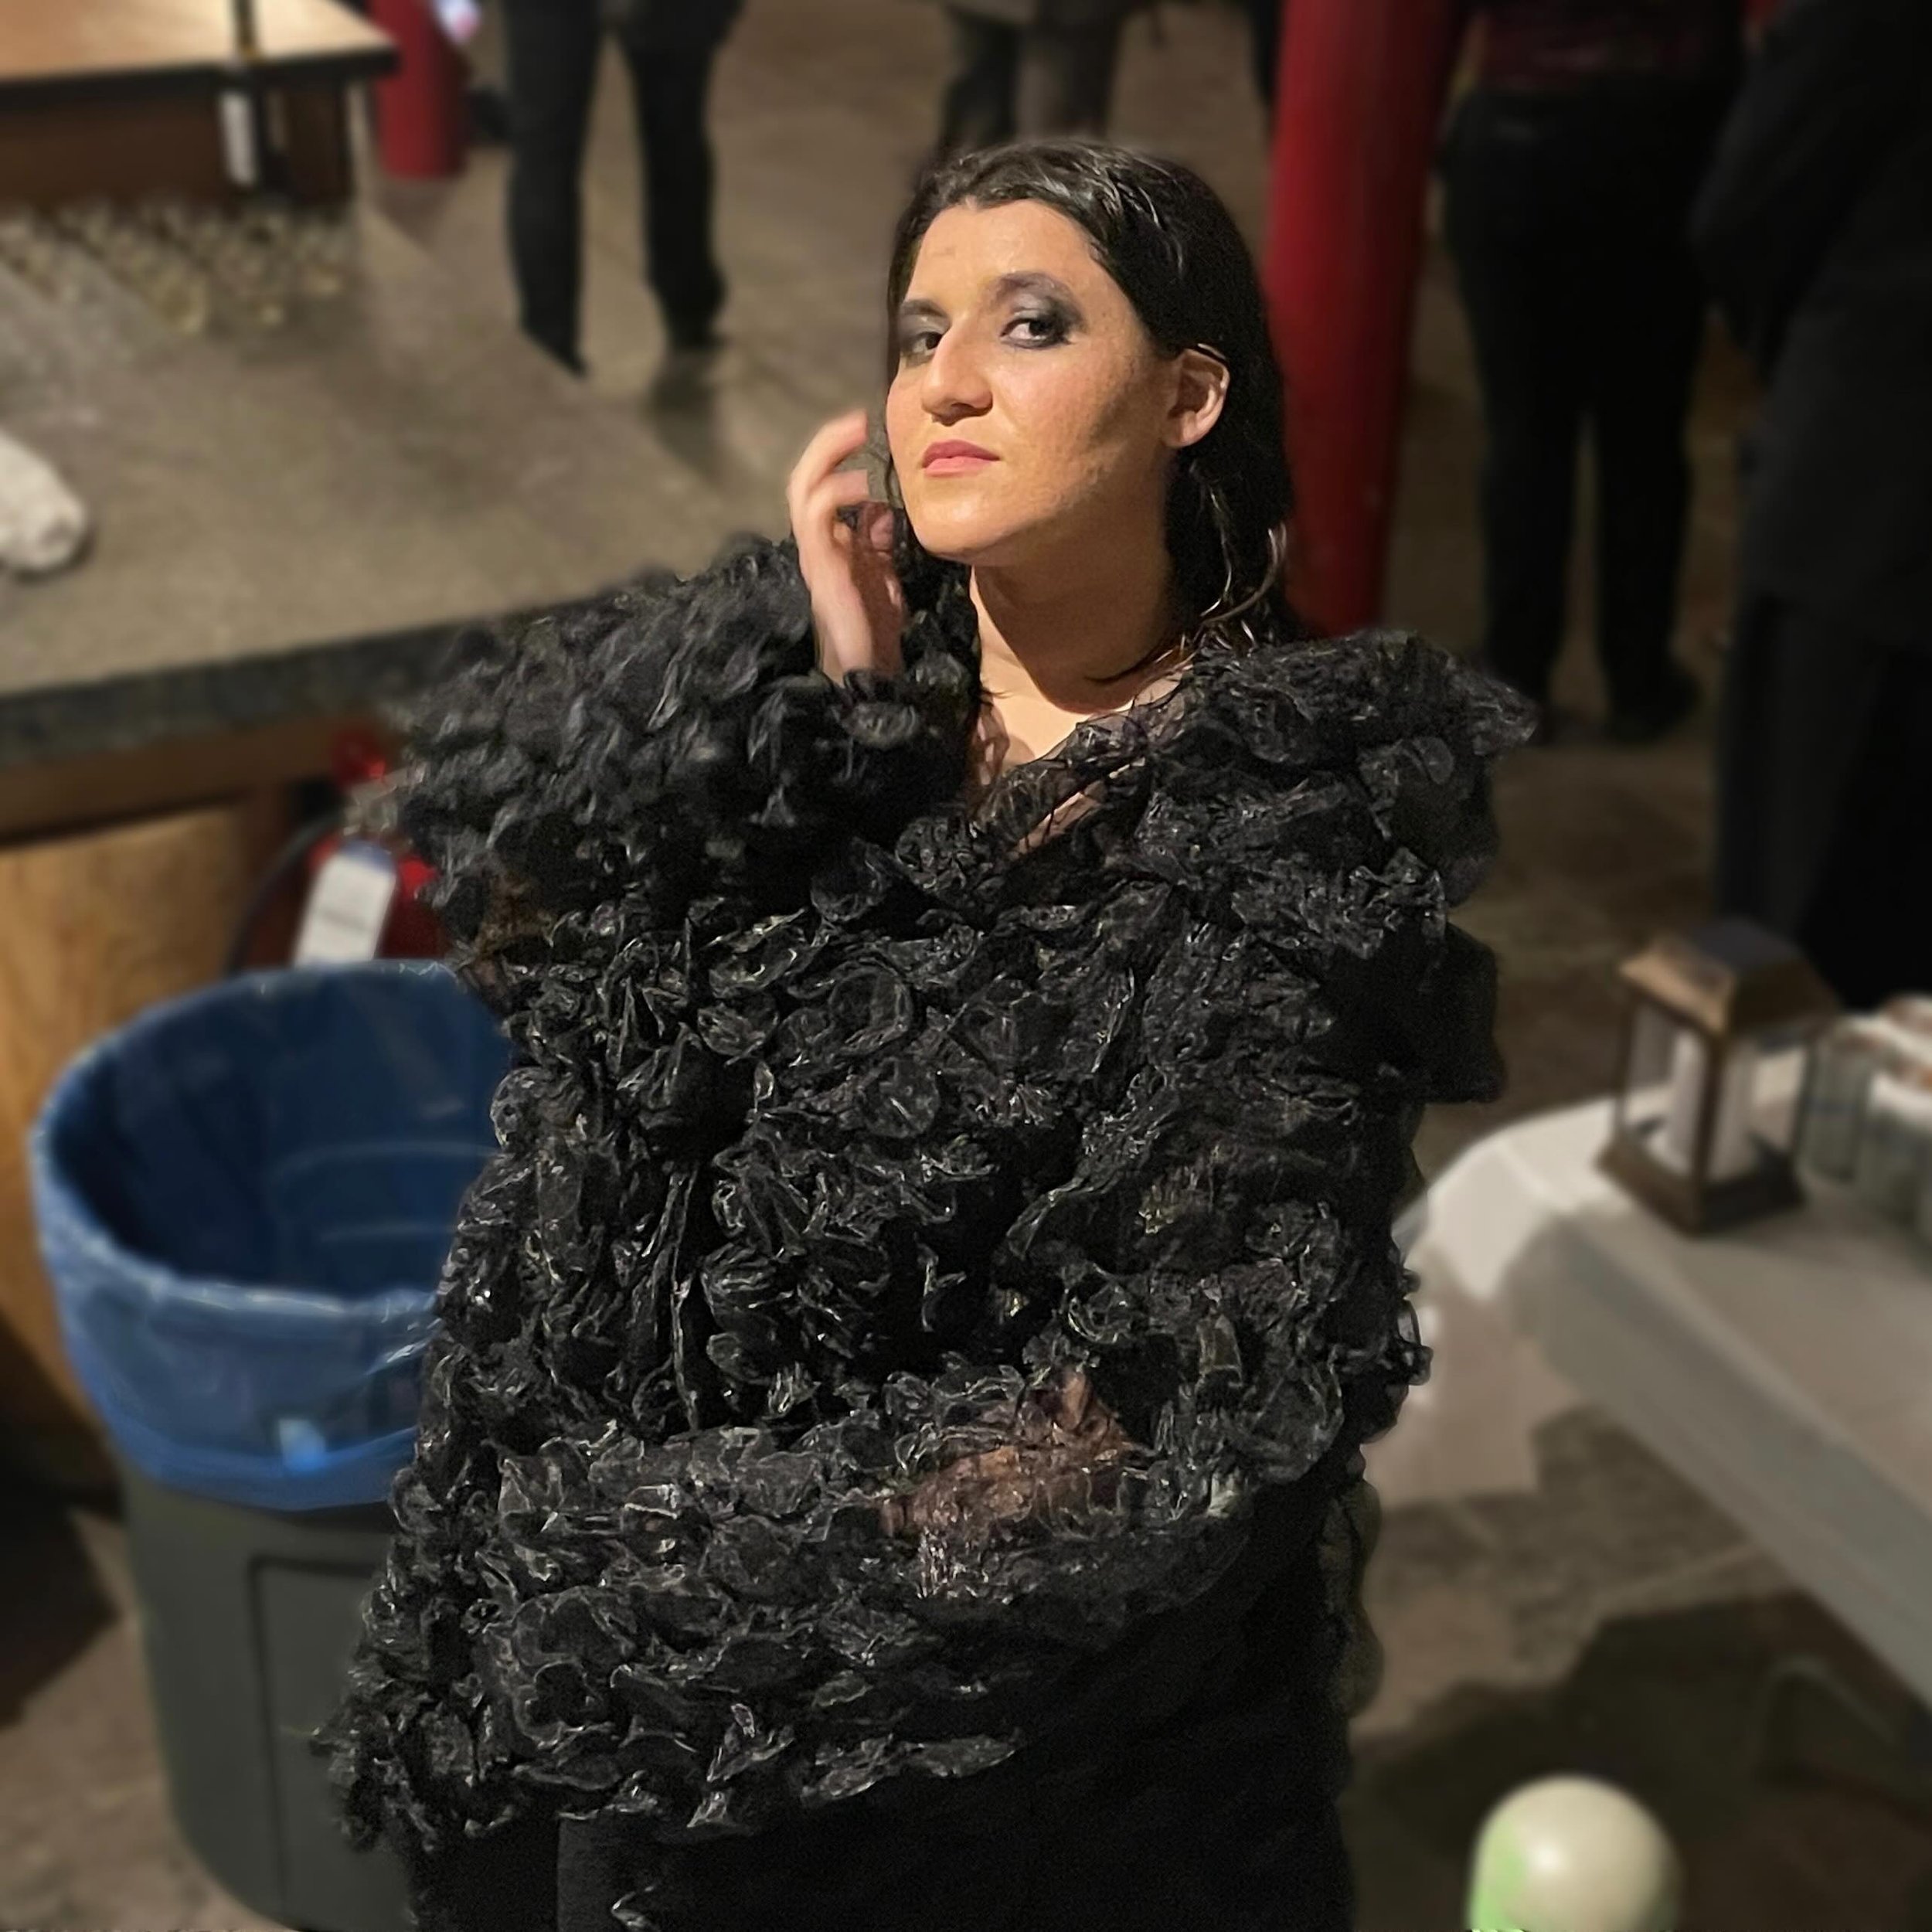 Azucena walking home and crying in the rain in her Weimar Republic look, thinking about her mom being burned at the stake
@carnegiehall

Here we have our sexy wet hair look! Styled by Fay

✨Garbage can chic ✨

Via @deathofclassical

Our sold-out run 